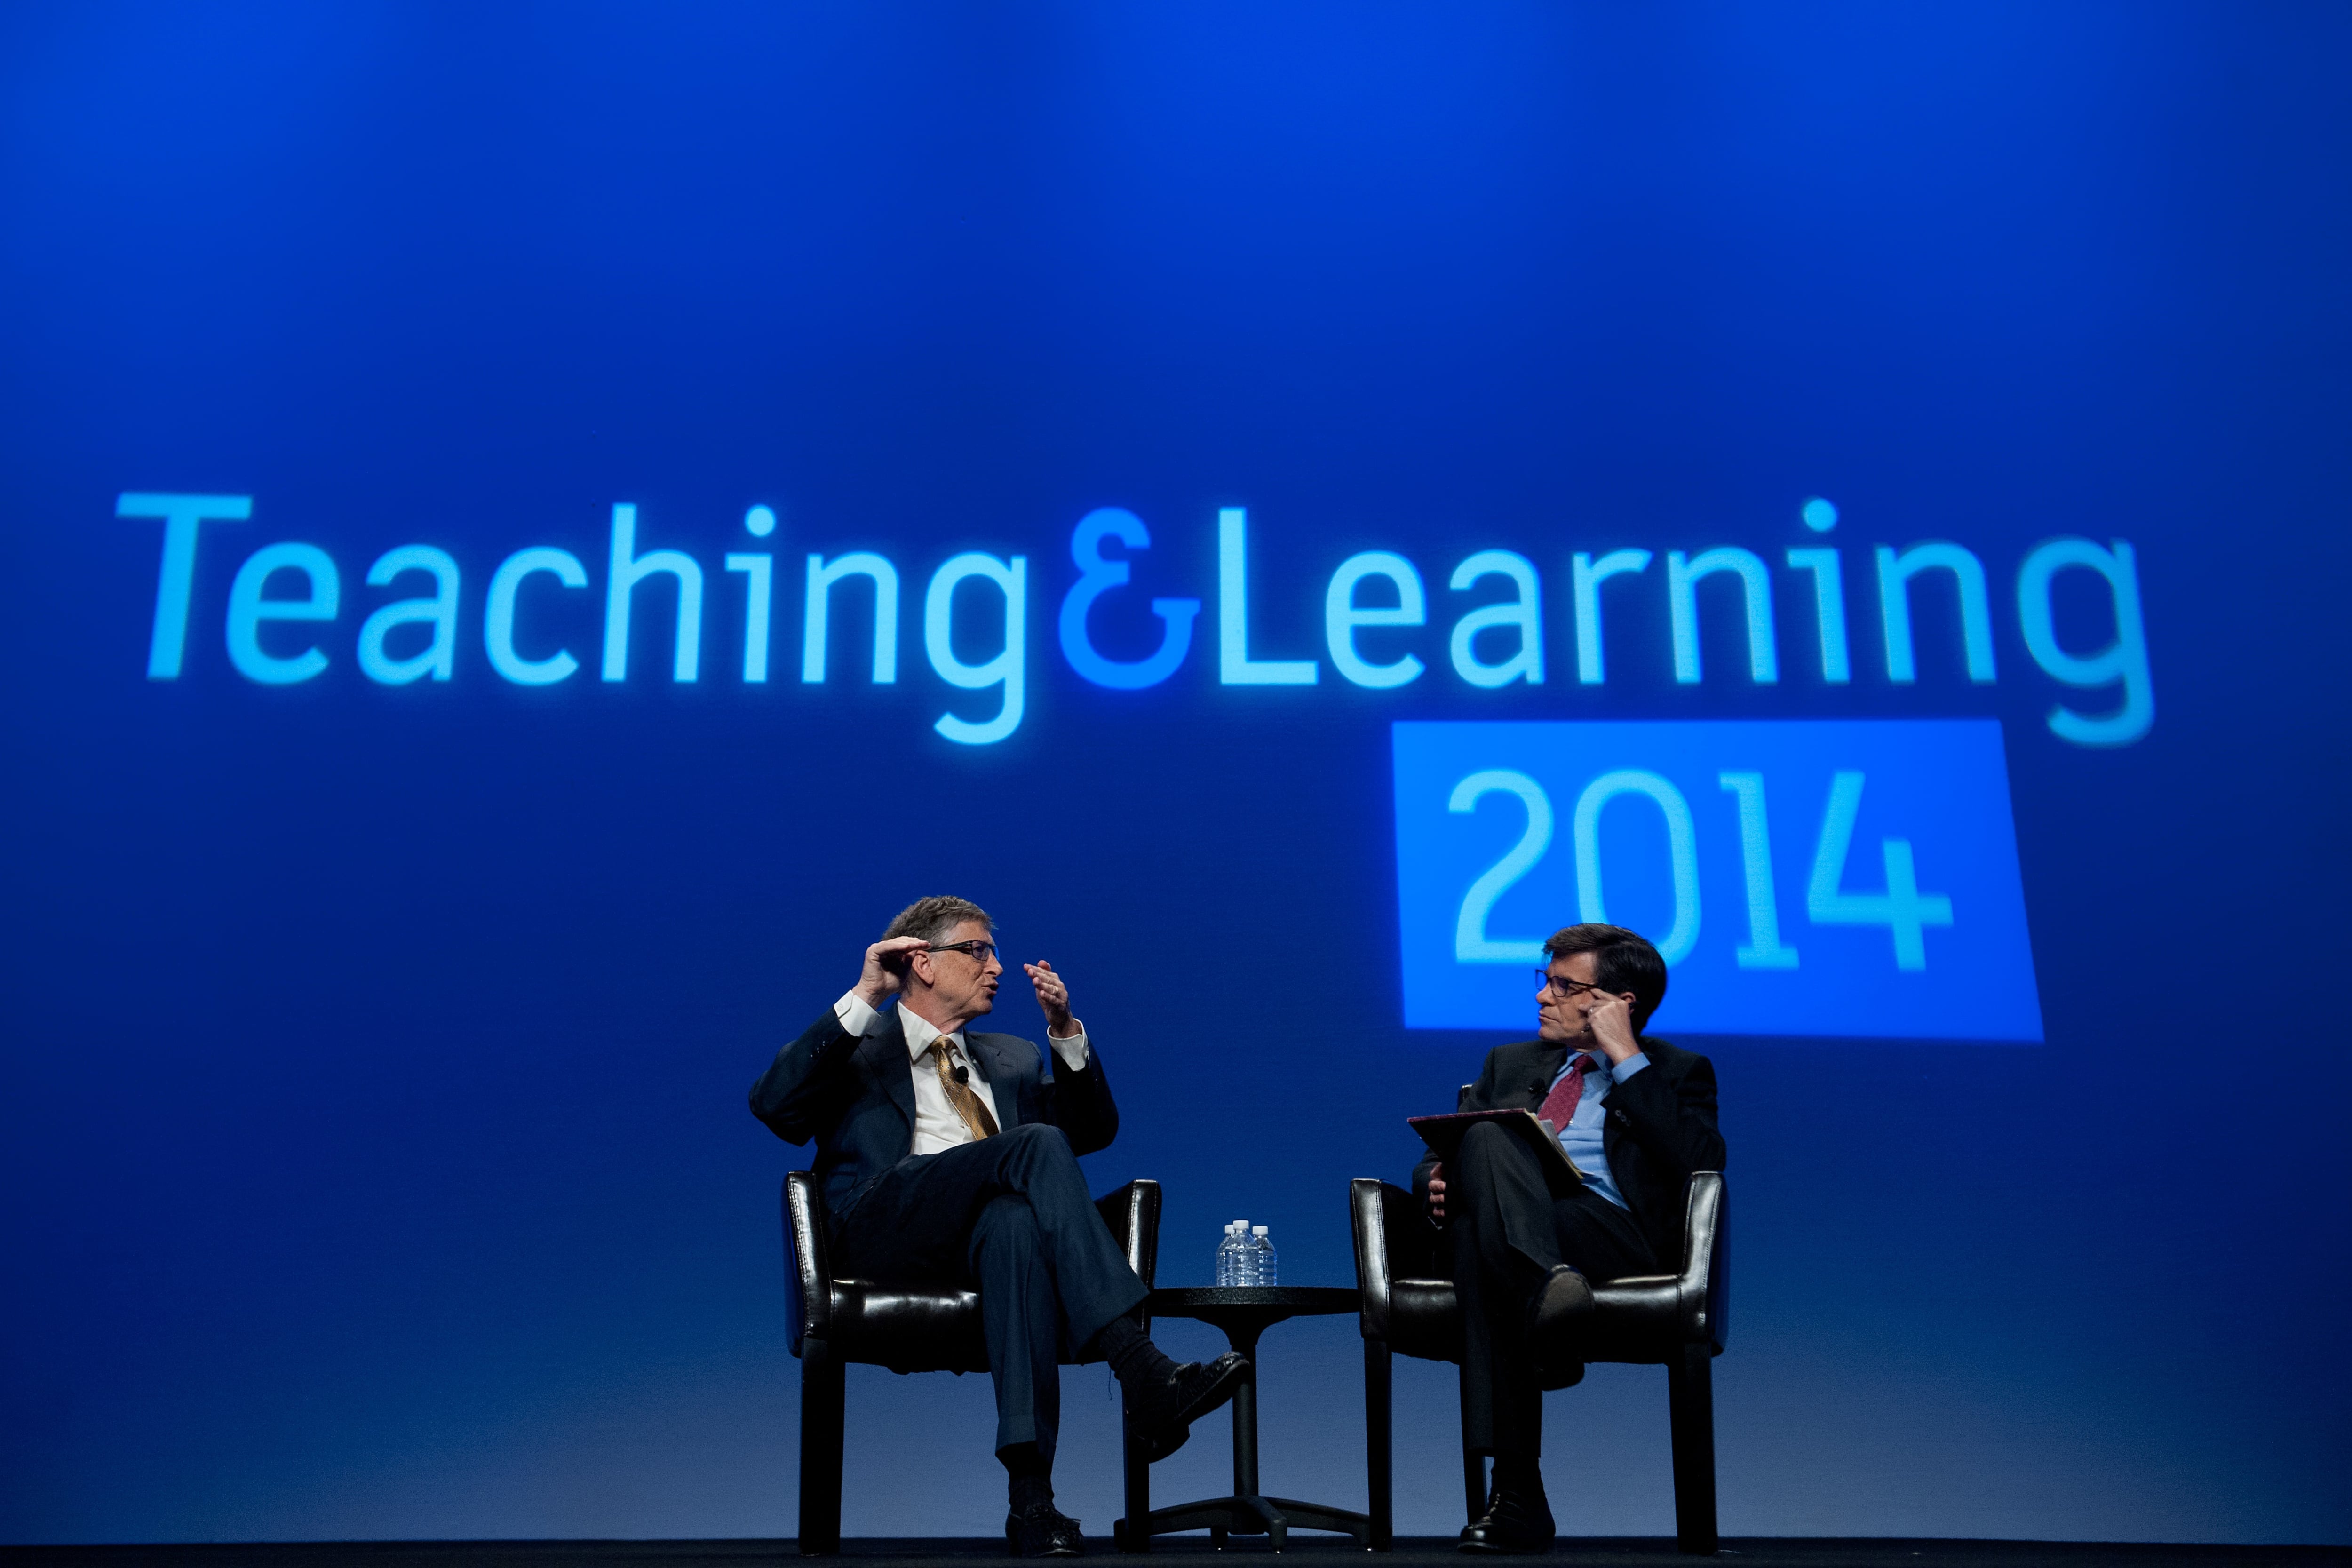 (Left to right) Microsoft founder Bill Gates and television host George Stephanopoulos sit face-to-face on stage during an interview in front of a blue projected backdrop that reads “Teaching &amp; Learning 2014”.